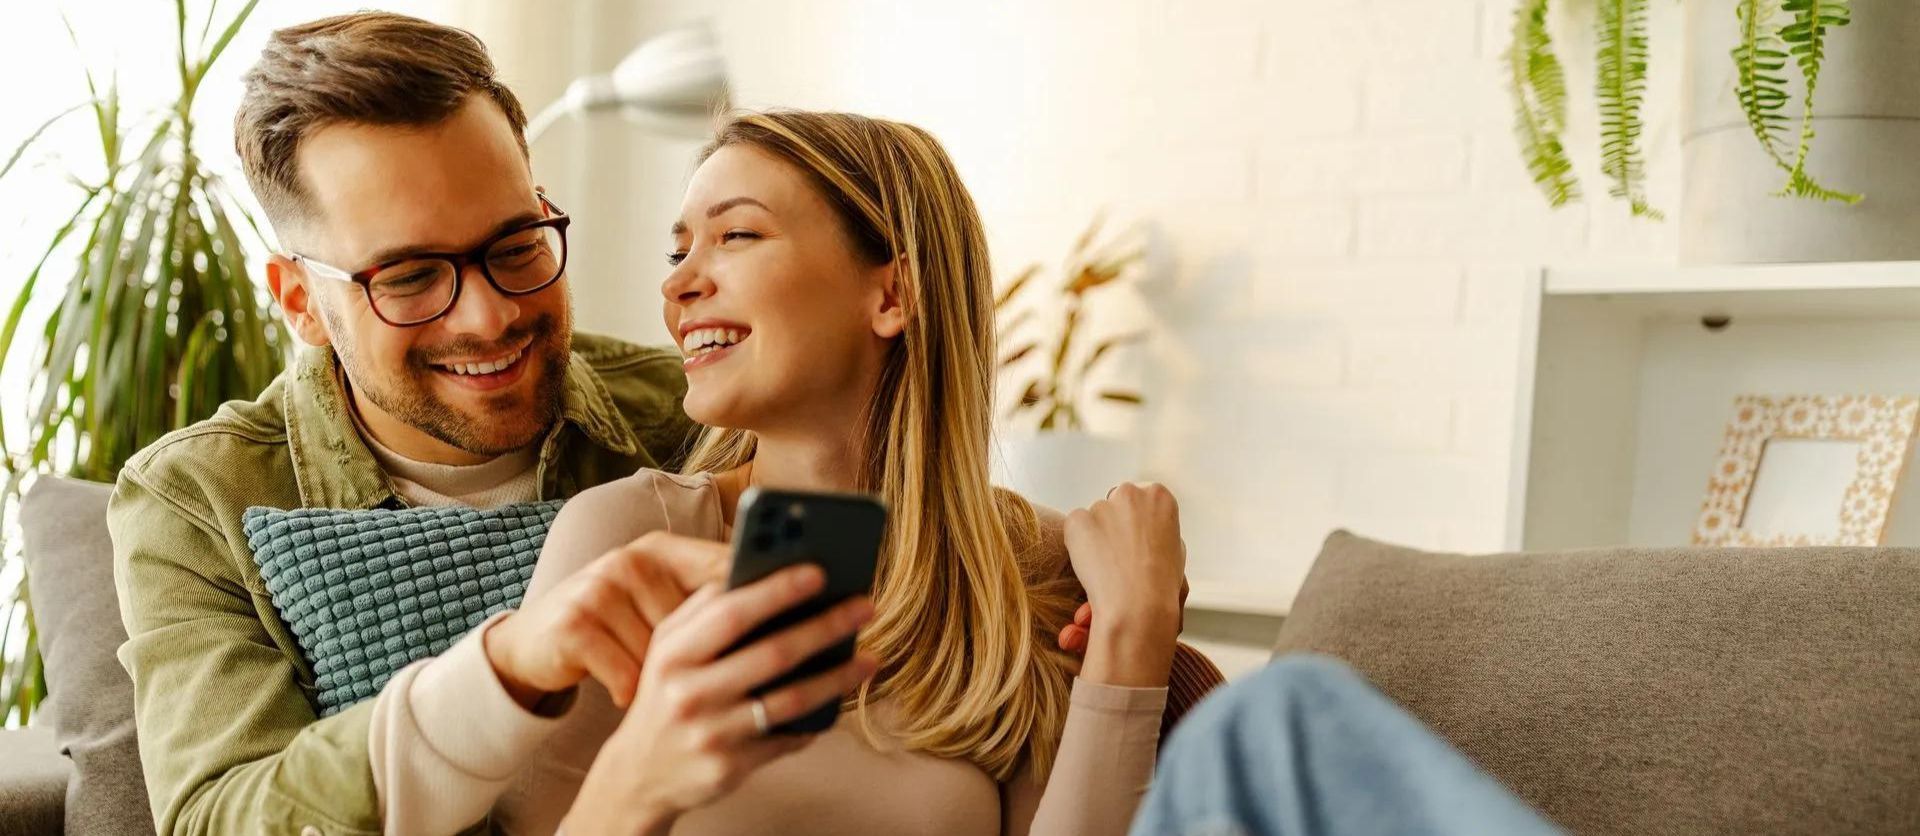 A man and a woman are sitting on a couch looking at a cell phone.